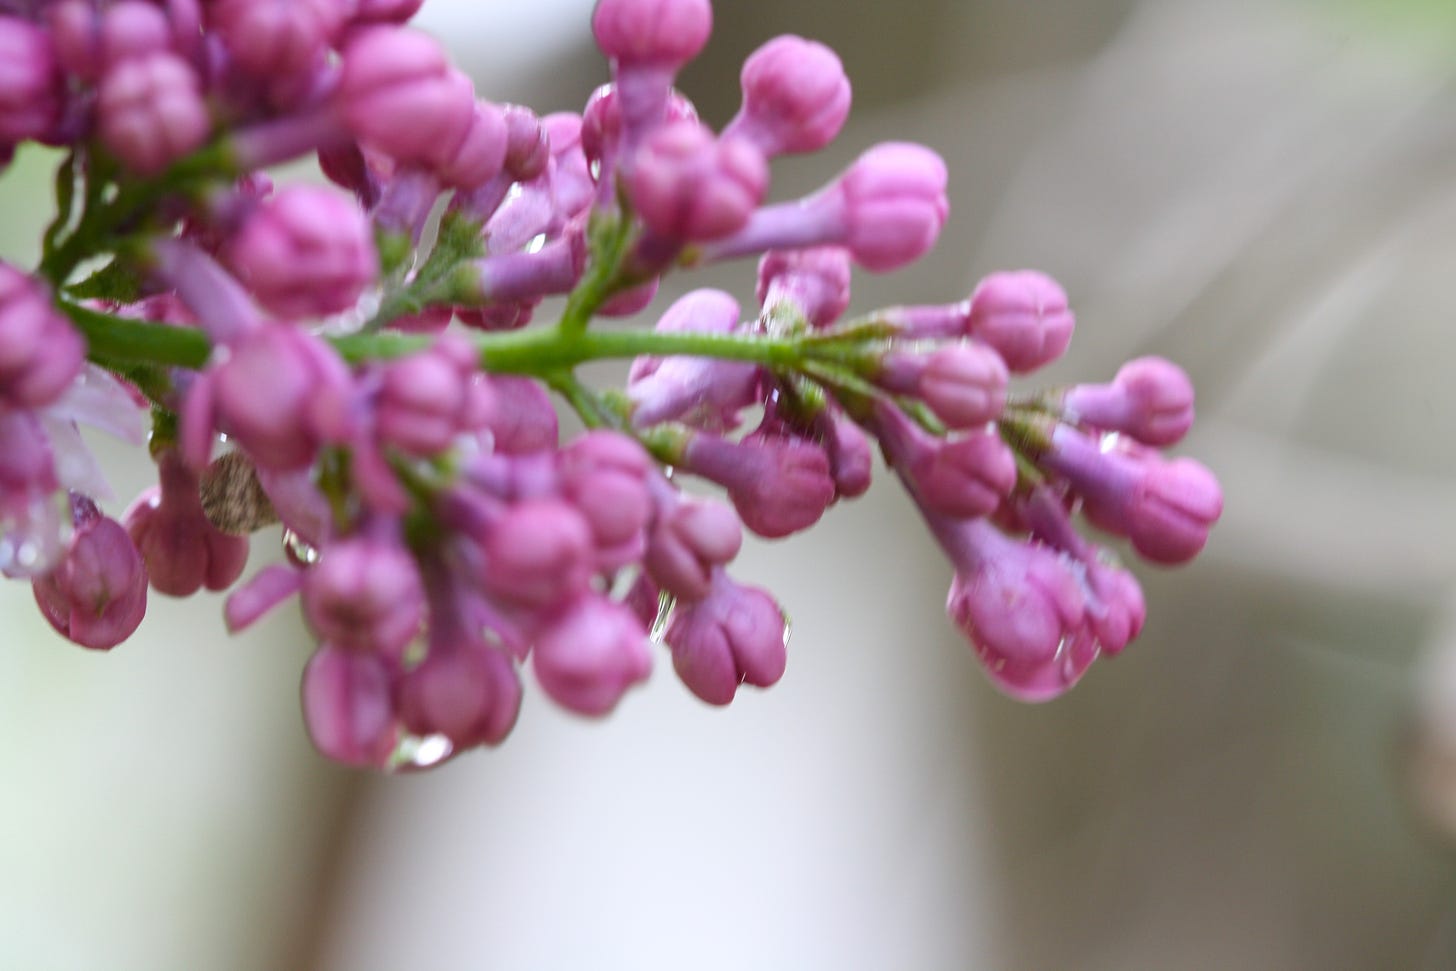 a lilac bloom, with dew dripping off the purple blossoms